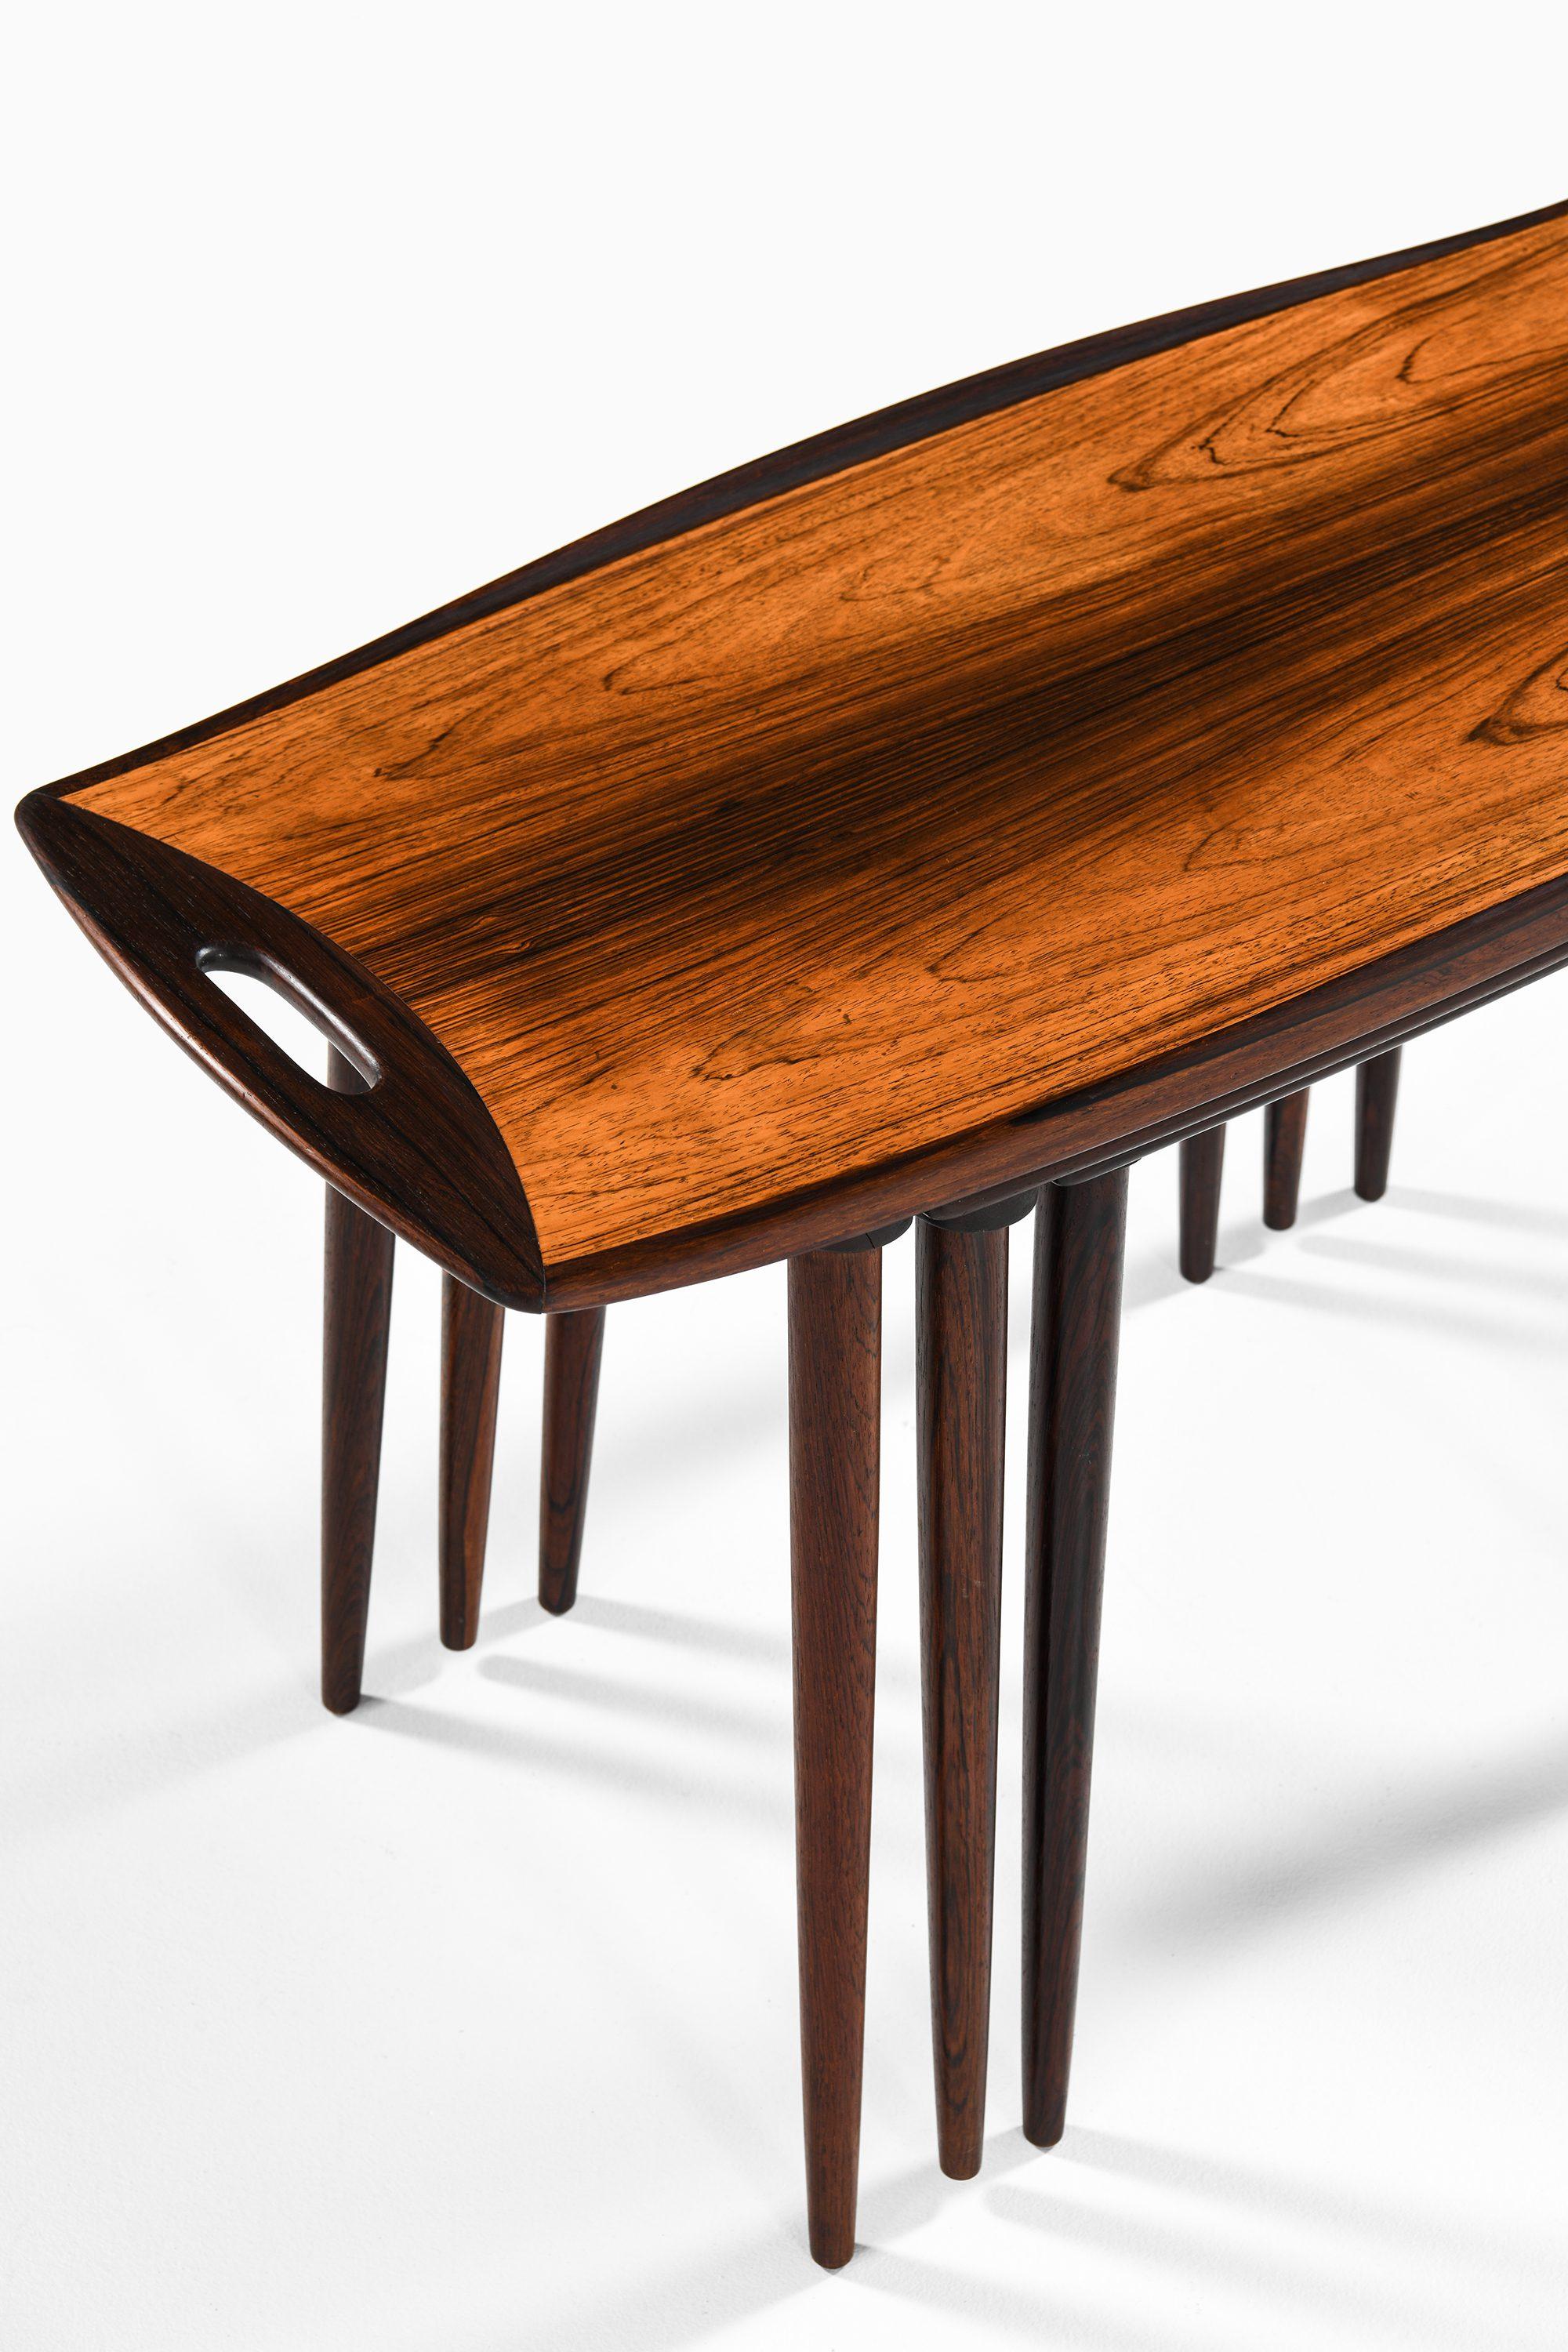 Danish Nesting Tables in Rosewood by Jens Quistgaard, 1964 For Sale